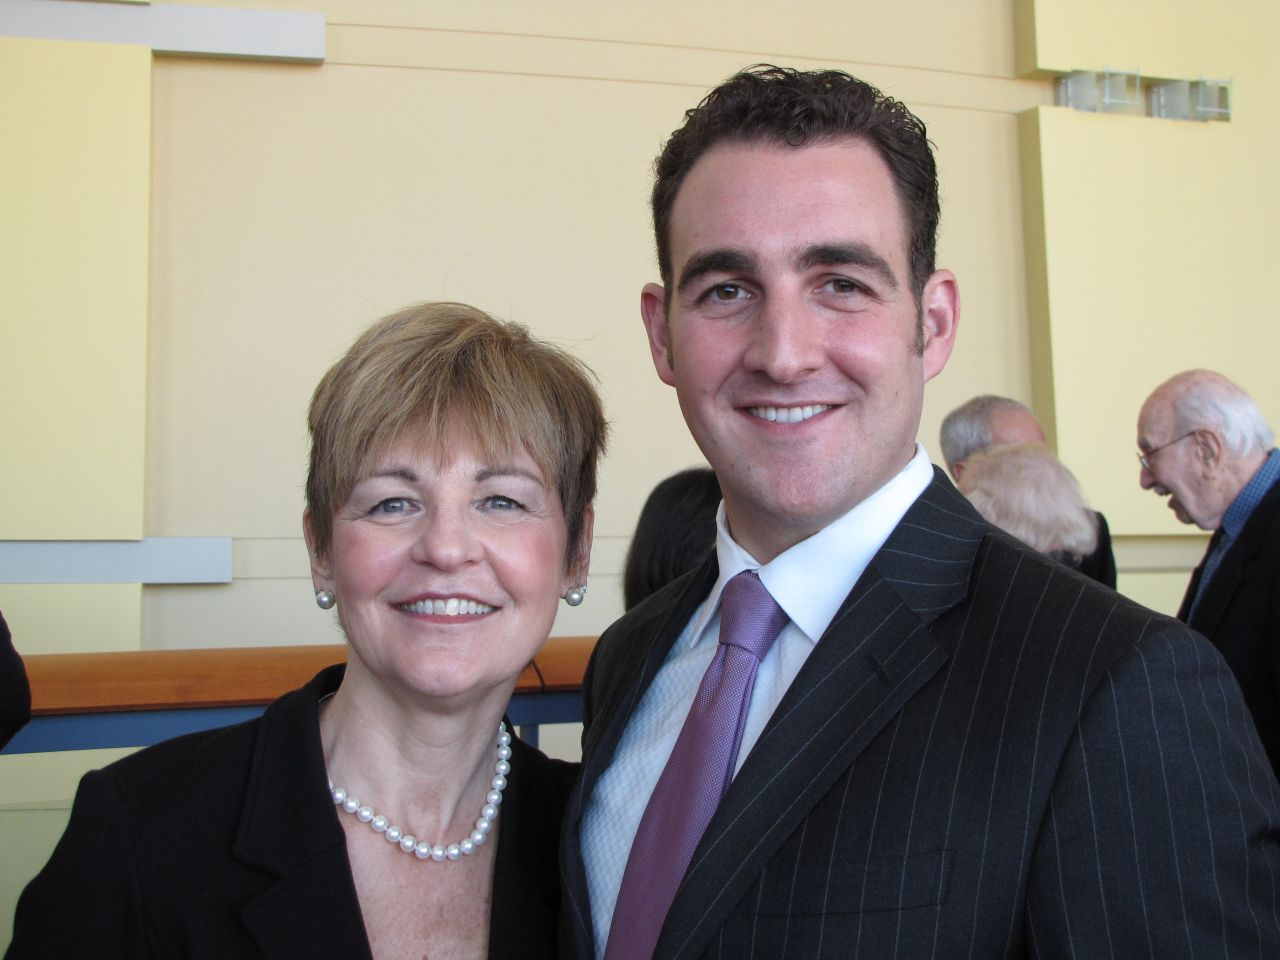 Former ISBA President Cheryl Niro with her son, Christopher, who was admitted to the bar on Thursday.